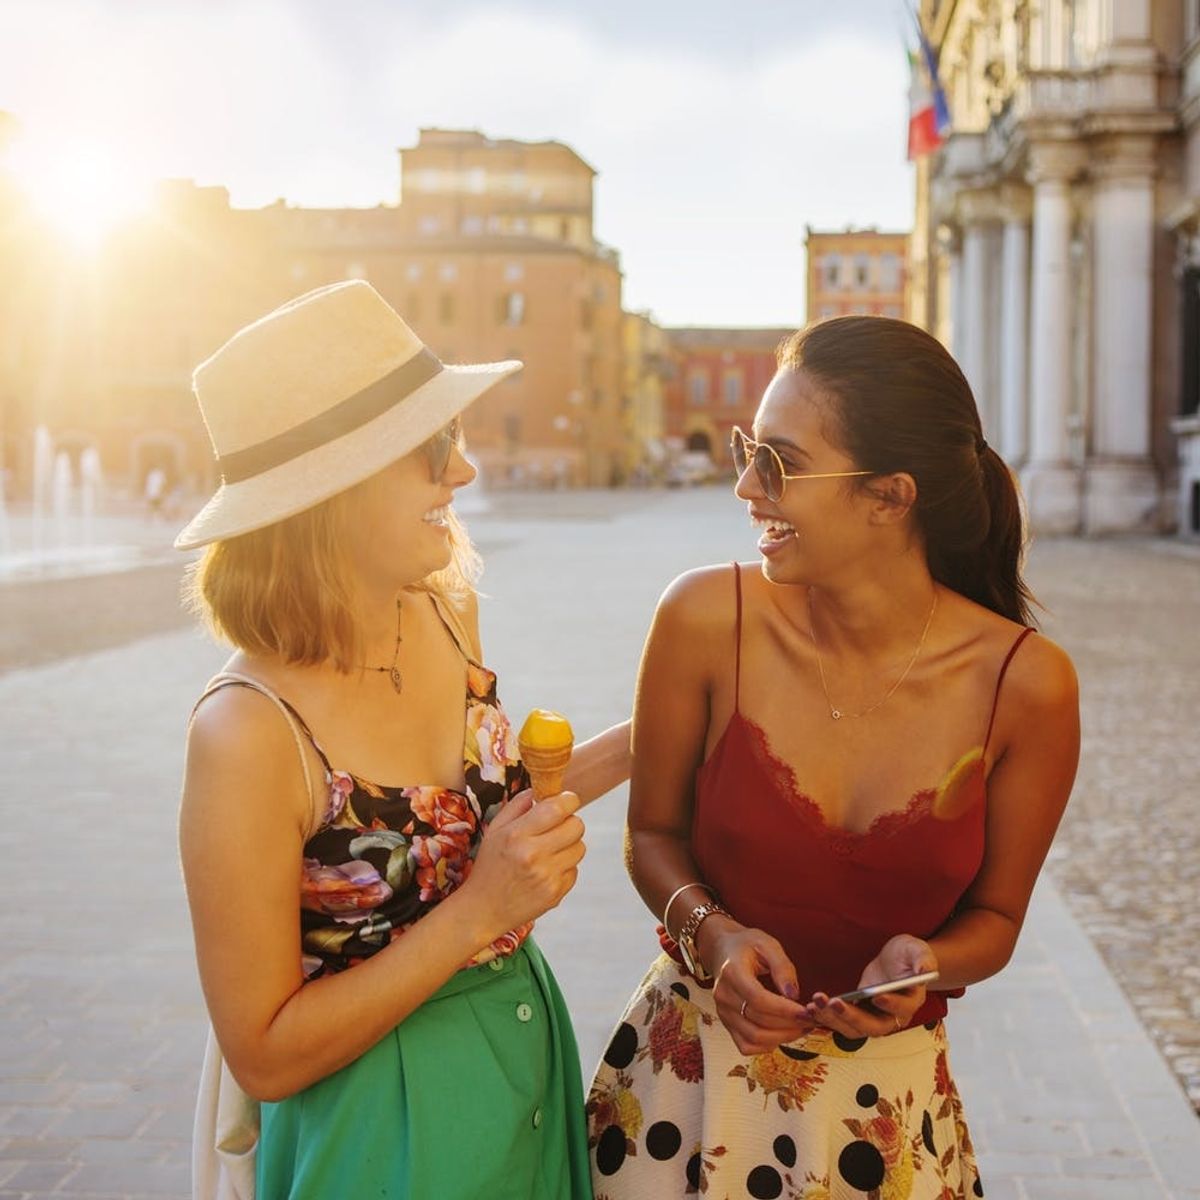 15 Times You Can Count on Your Best Friend’s Advice